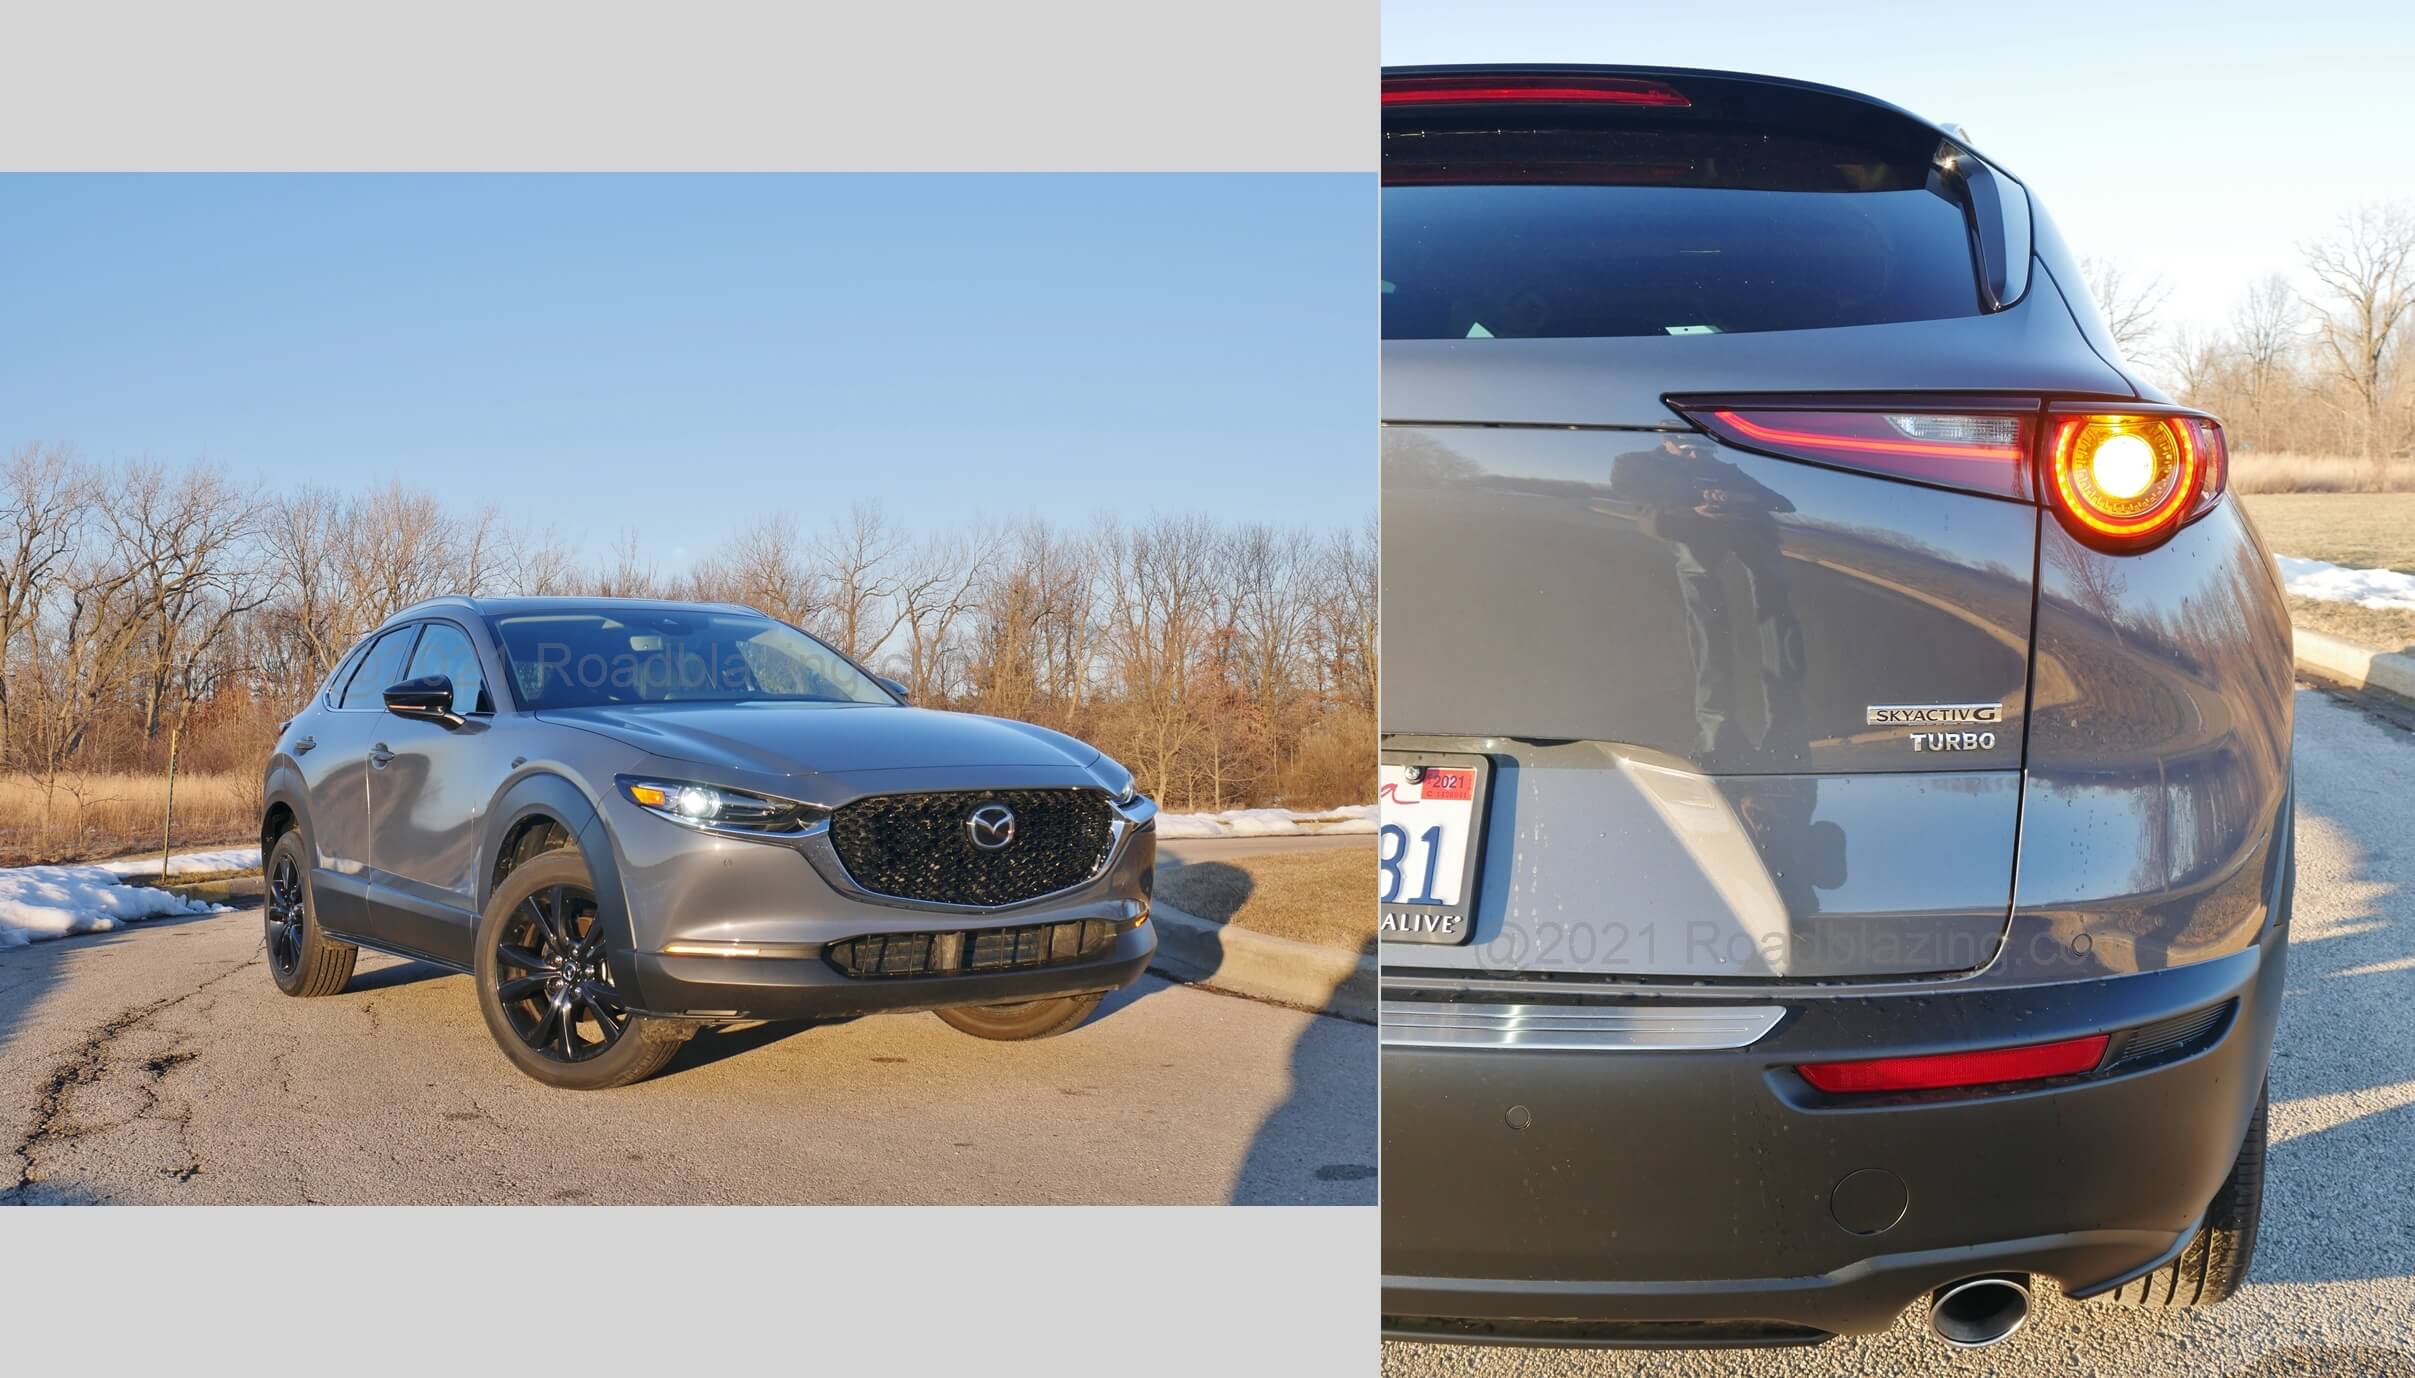 2021 Mazda CX-30 2.5 Turbo AWD: assertively striking in Polymetal Grey Metallic, w/ prominent roof spoiler and liftgate Skyactiv G "TURBO" emblem